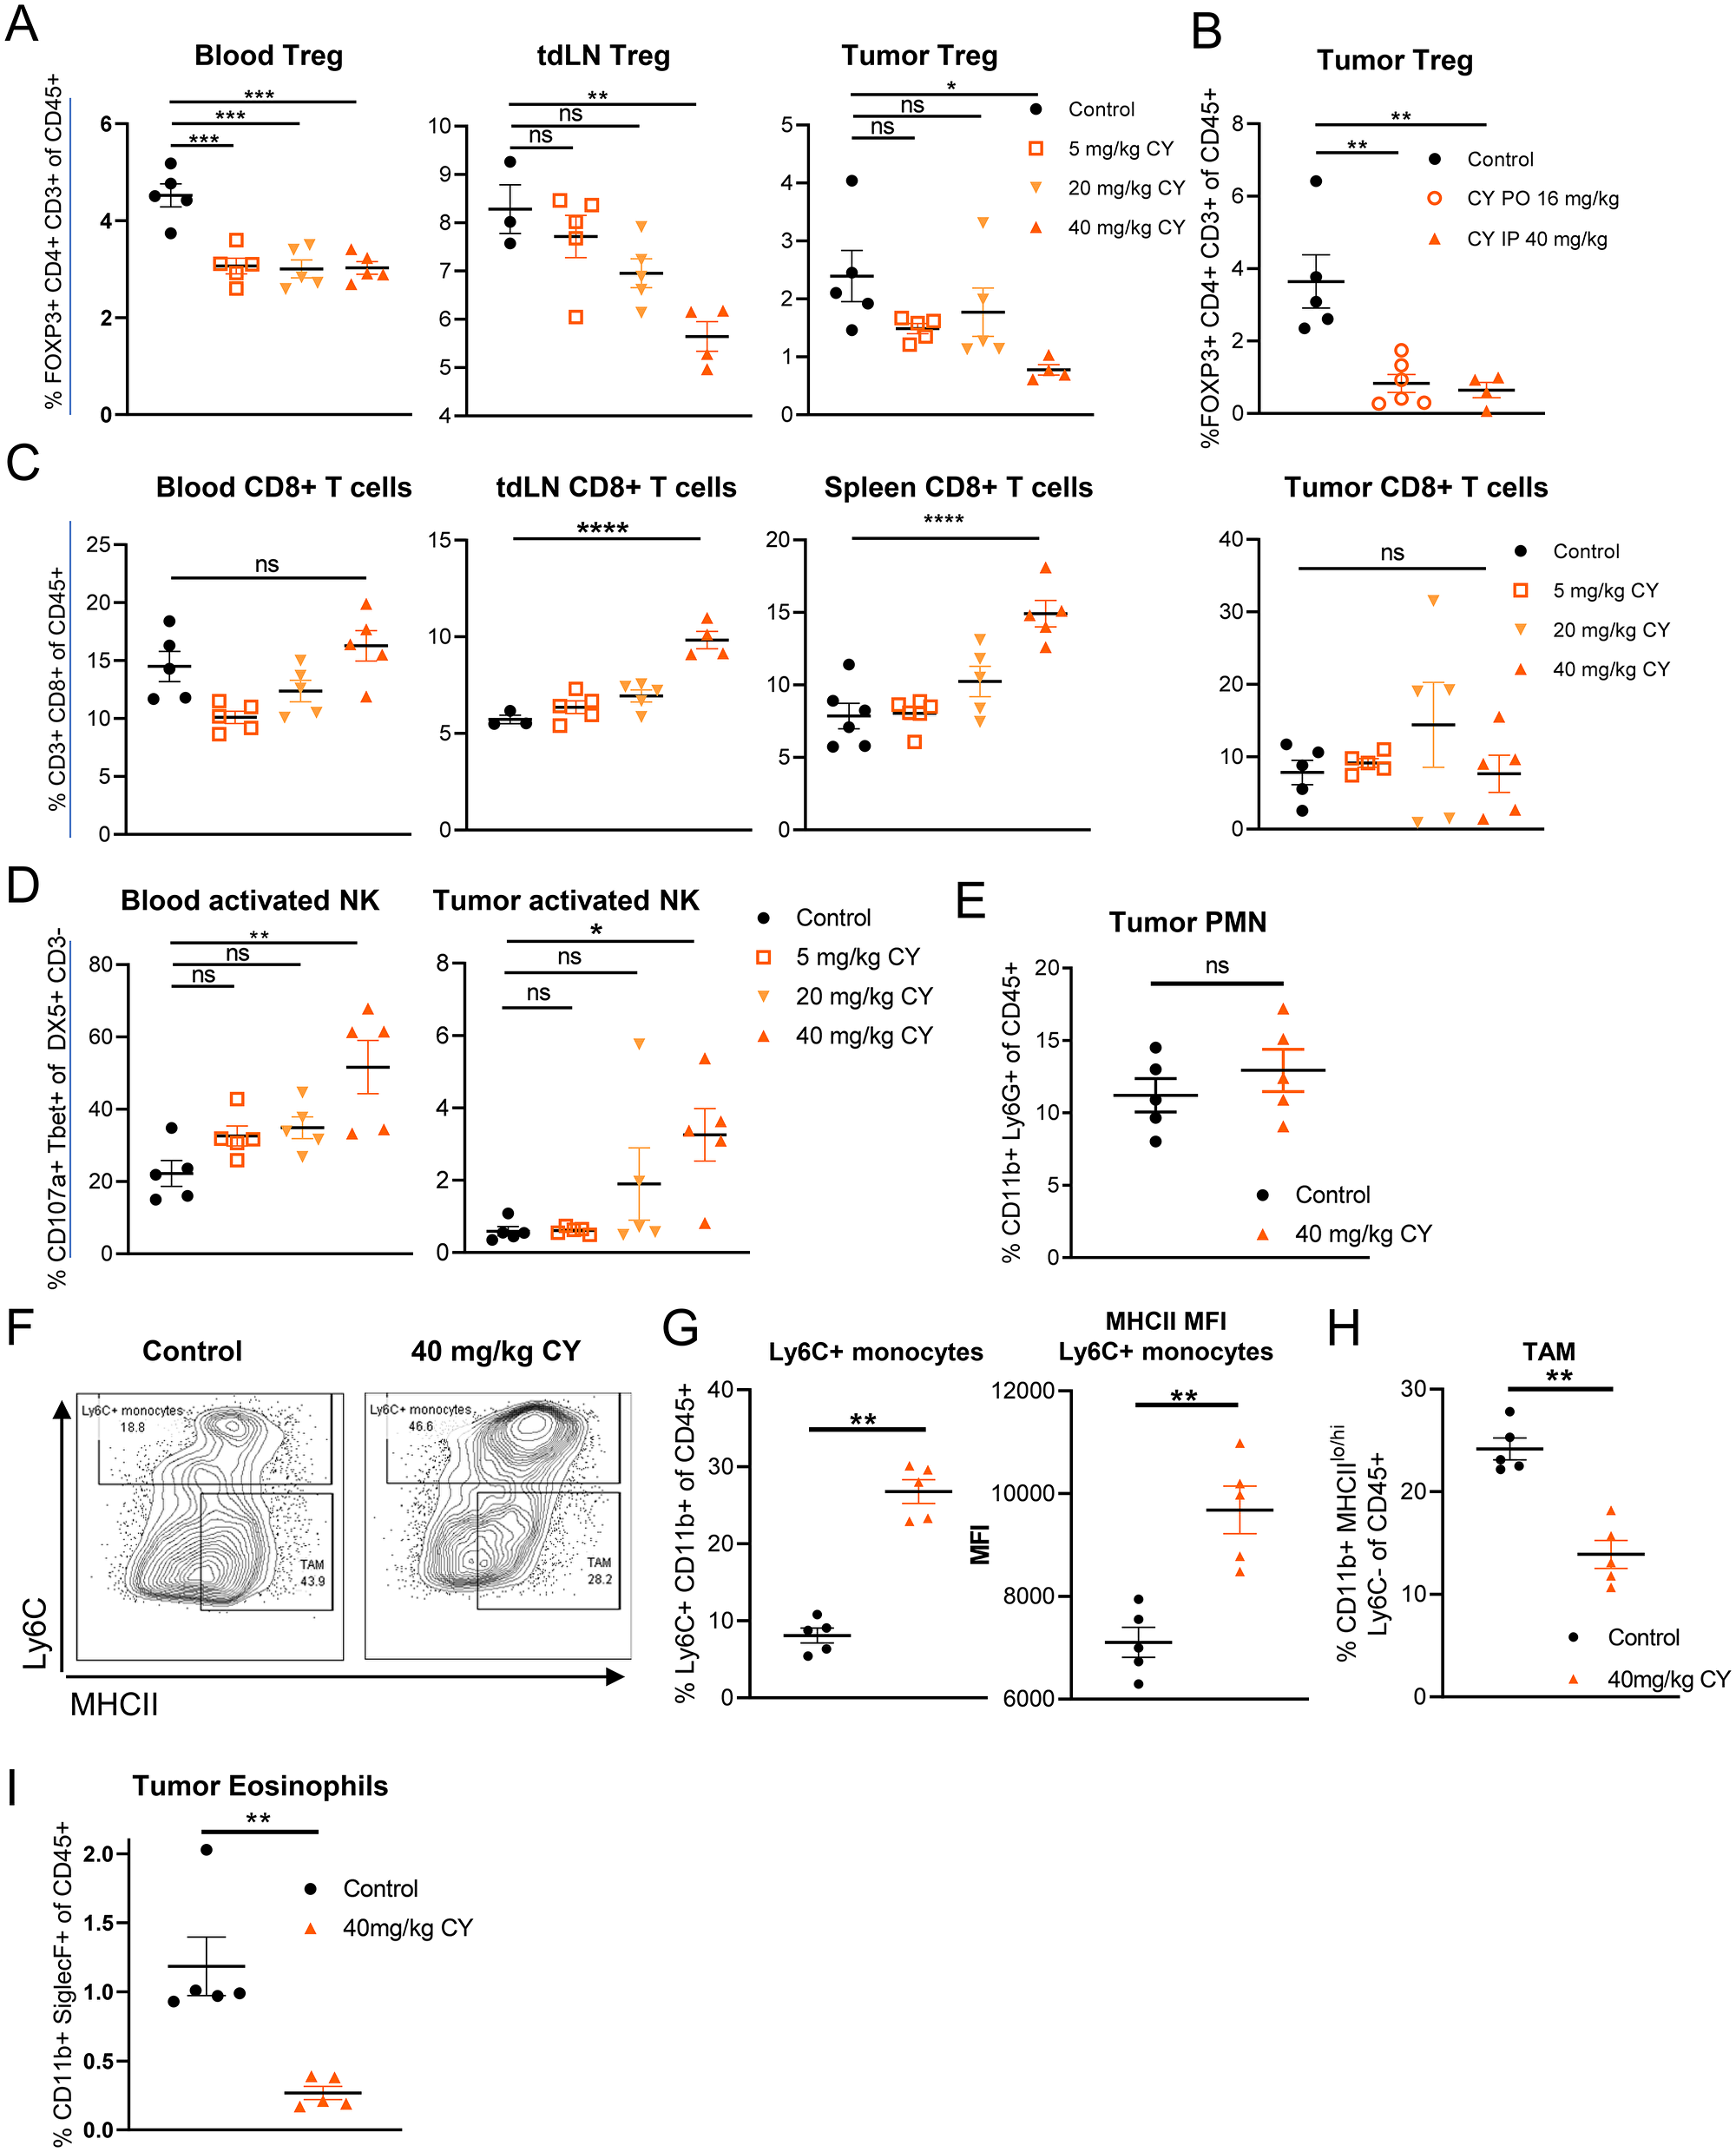 Low dose, metronomic cyclophosphamide decreases Tregs, increases activated NK cells and modulates the myeloid population in tumor-burdened mice.